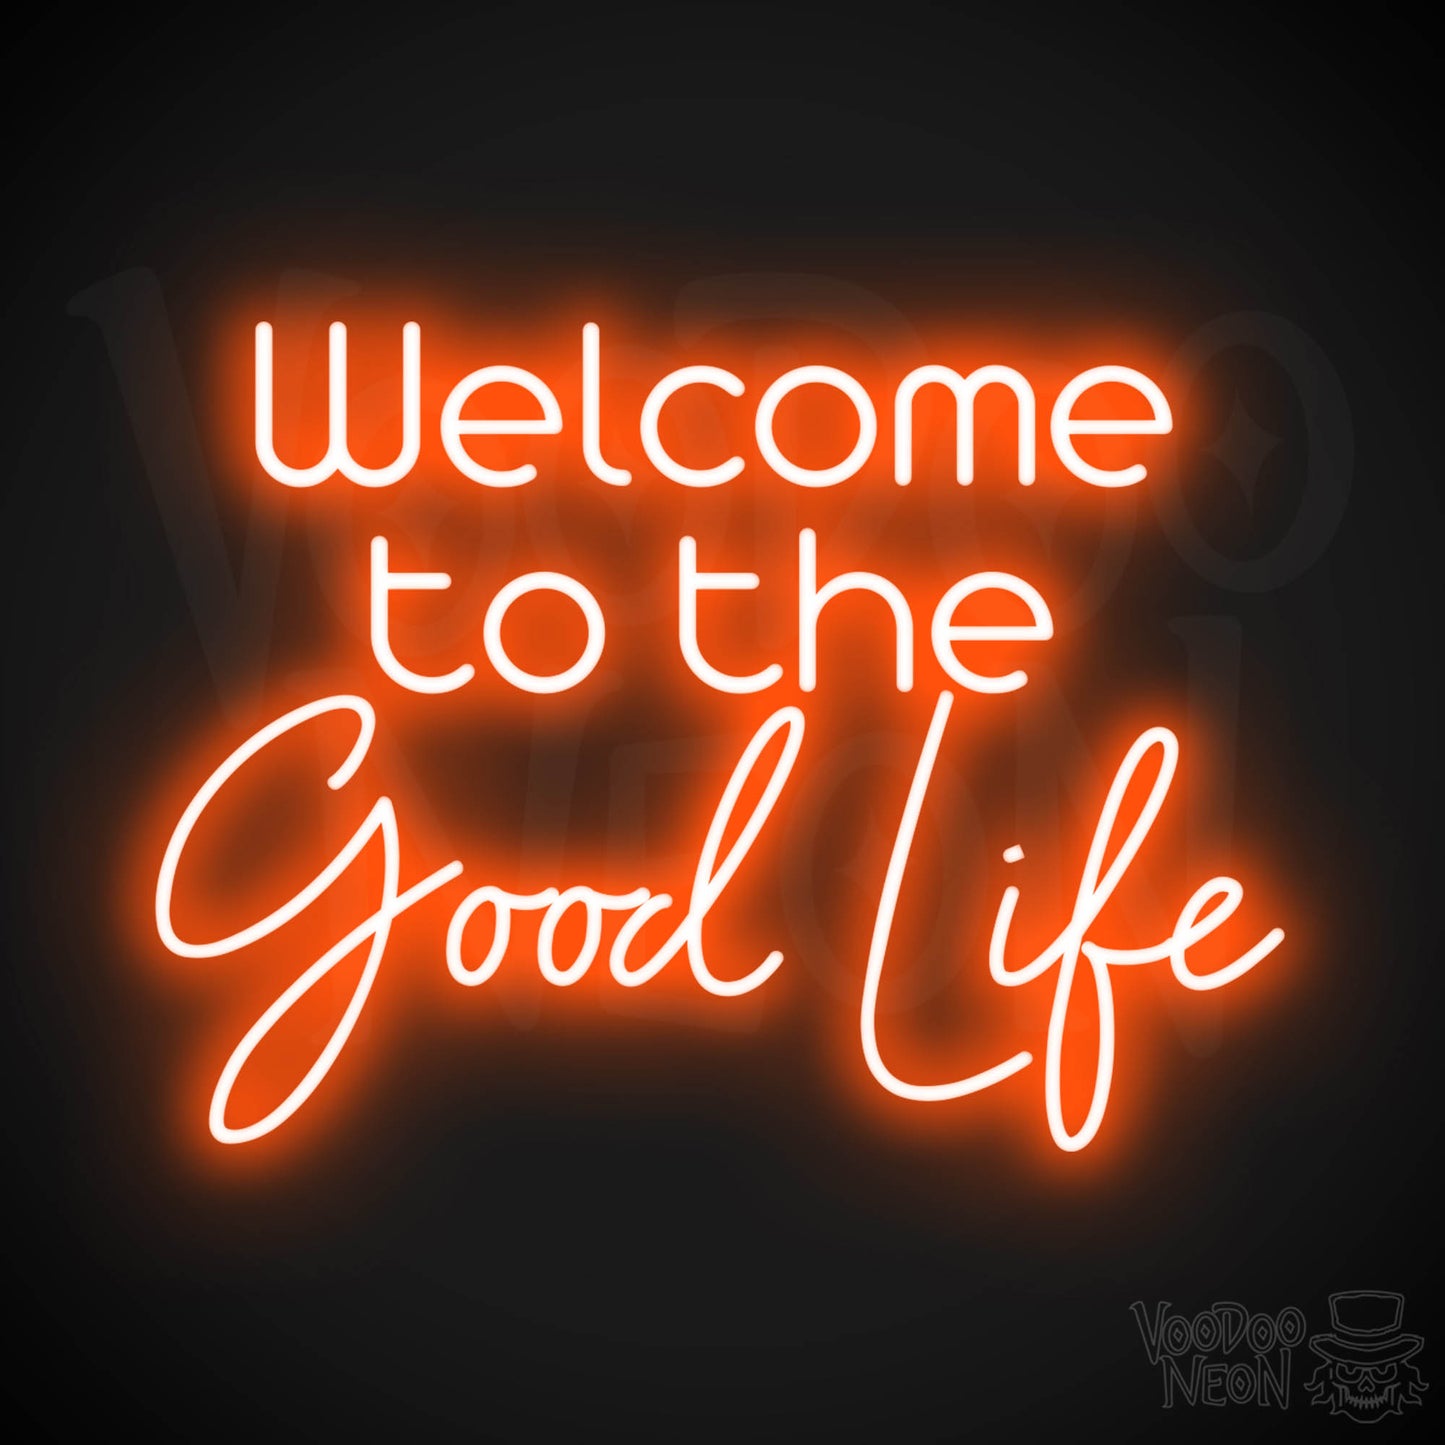 Welcome To The Good Life LED Neon - Orange